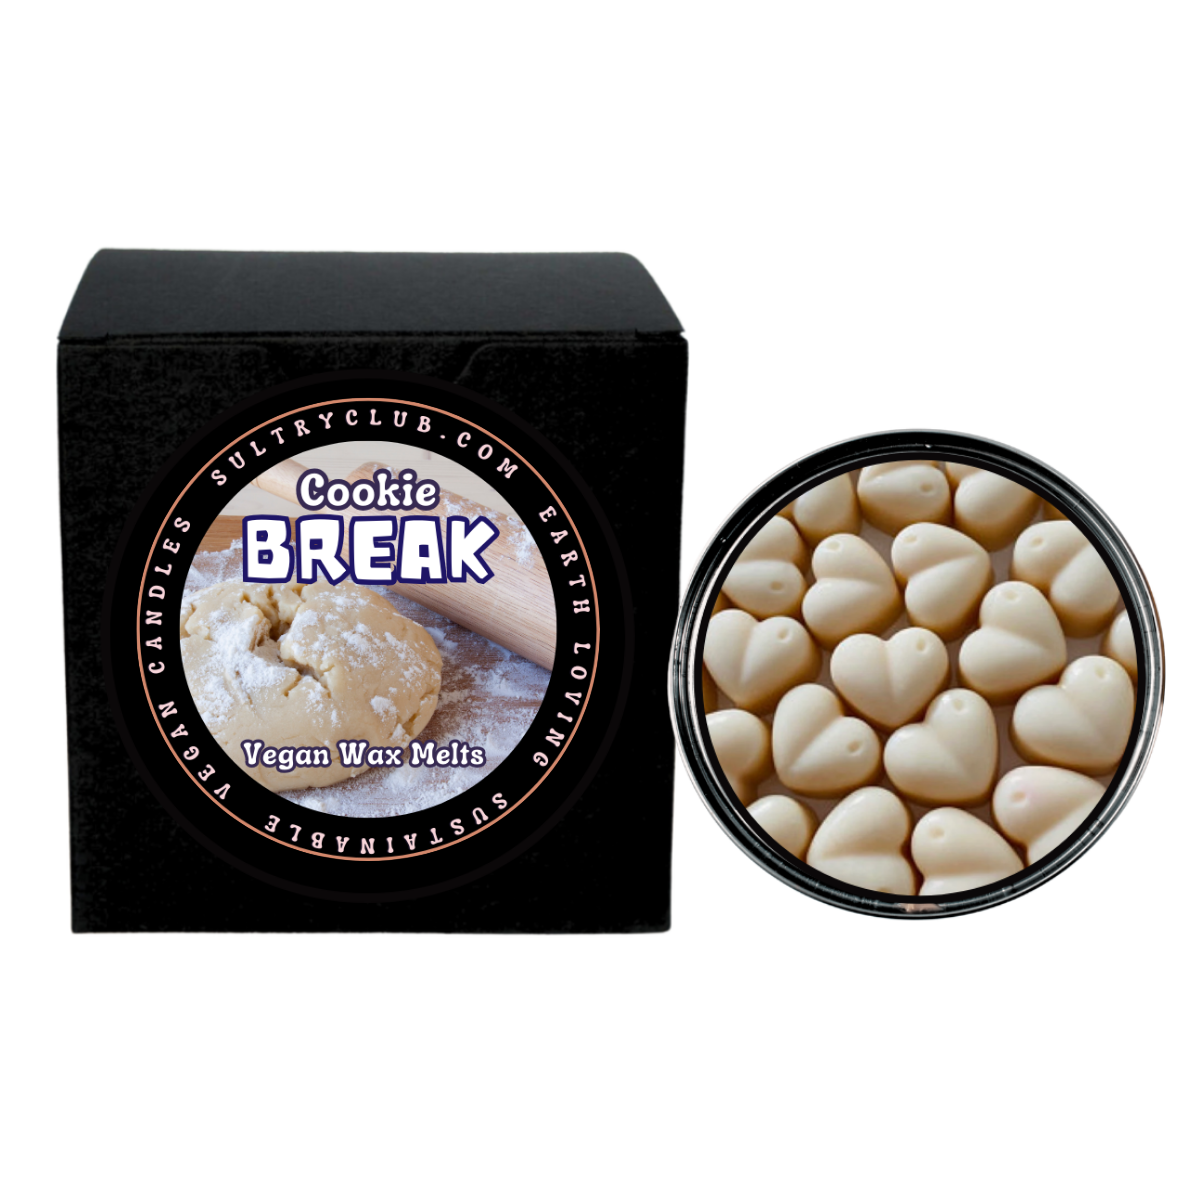 Cookie Break Fragrance Candle